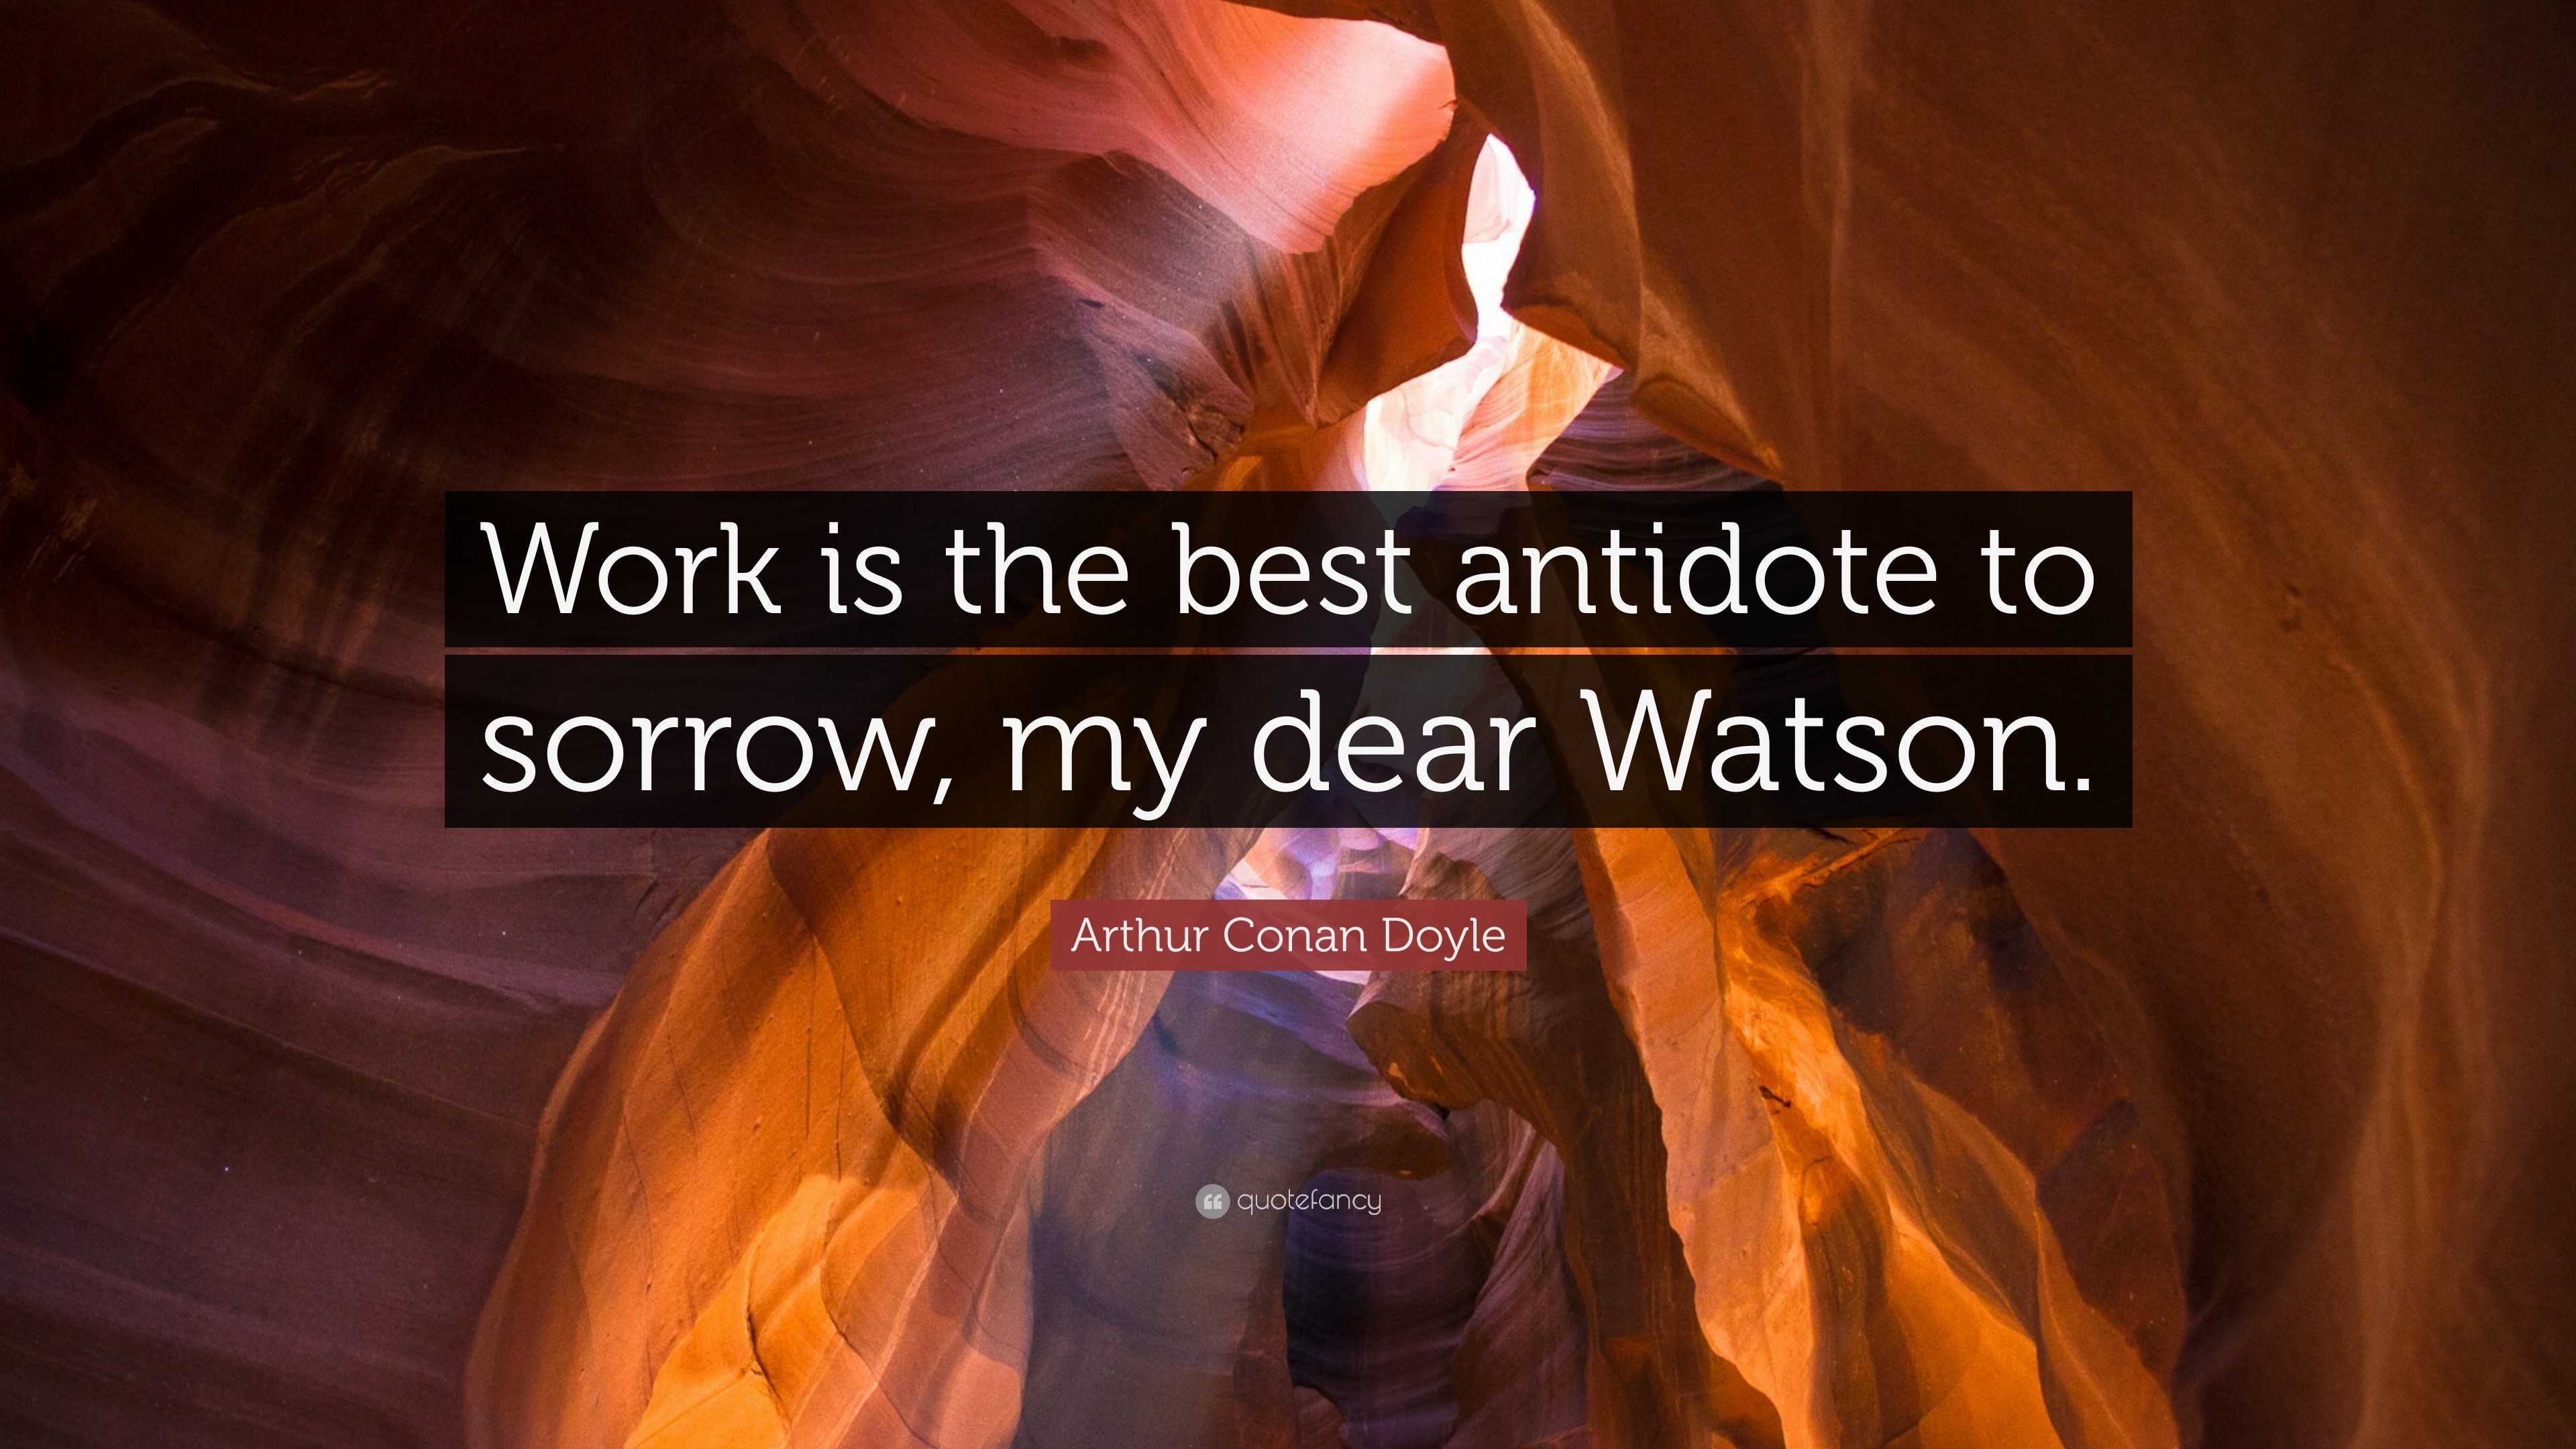 what is best in life conan quote arthur conan doyle quote u201cwork is the best antidote to sorrow my